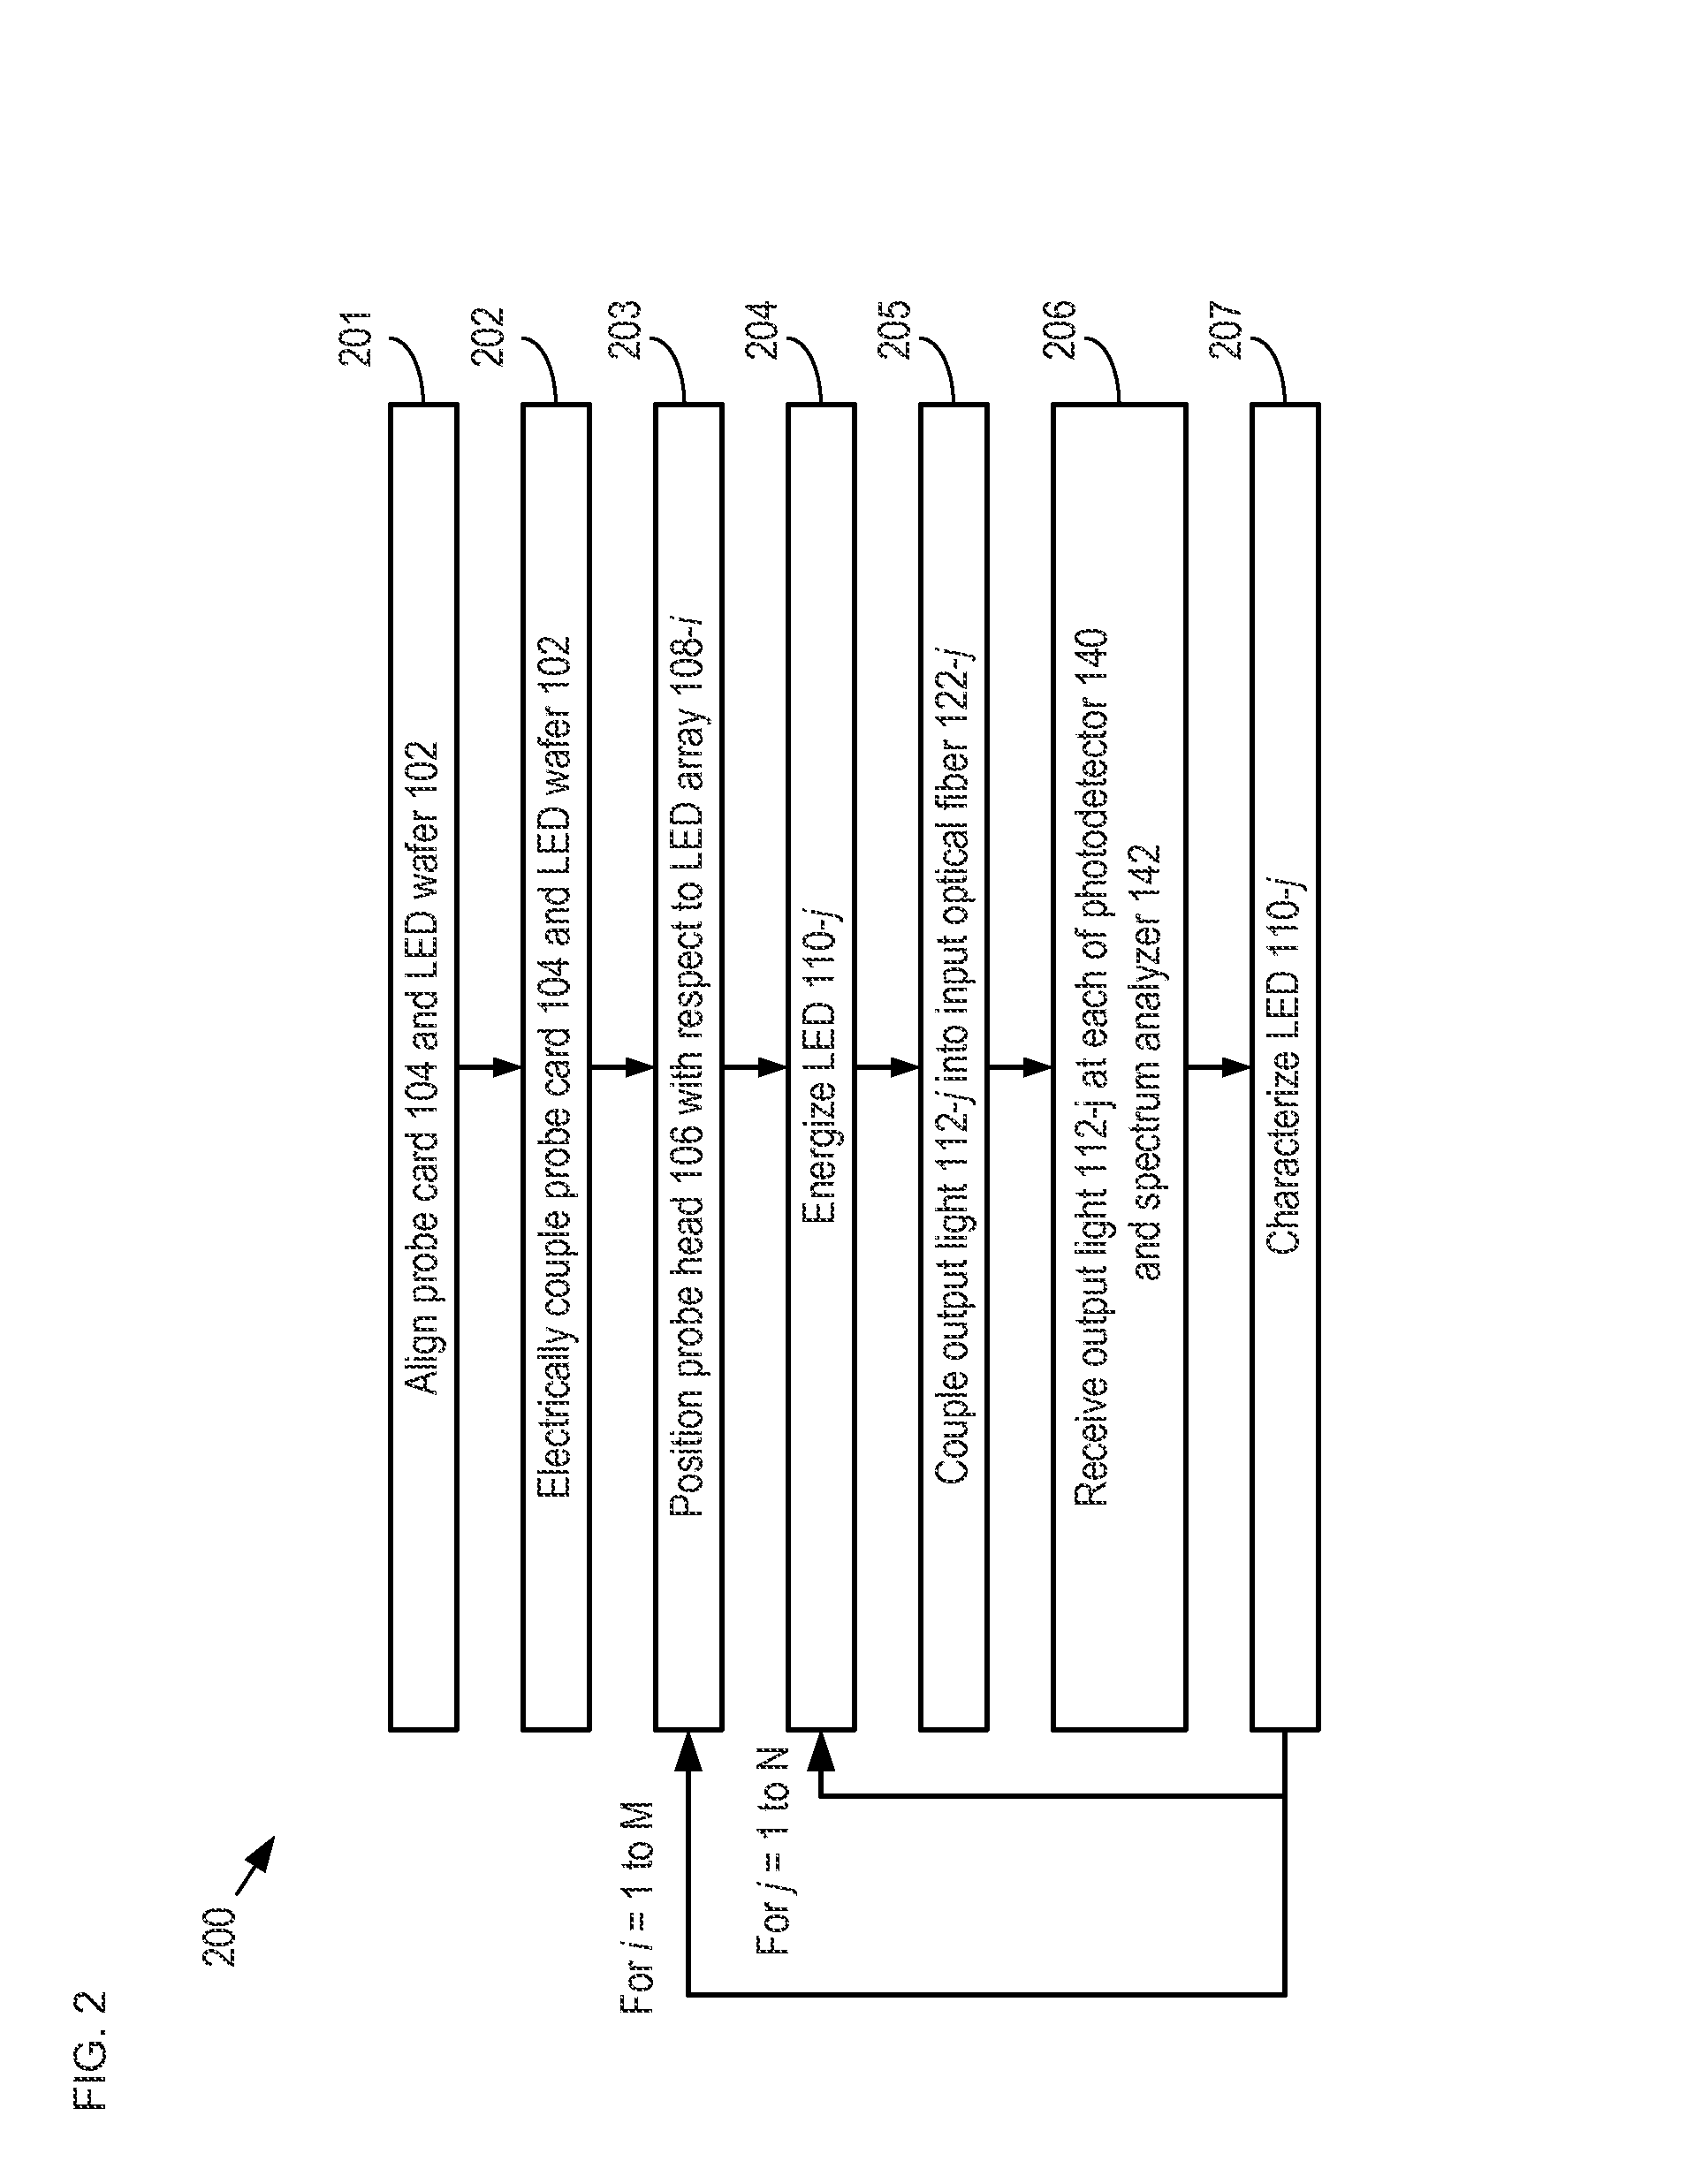 Optoelectronic-device wafer probe and method therefor